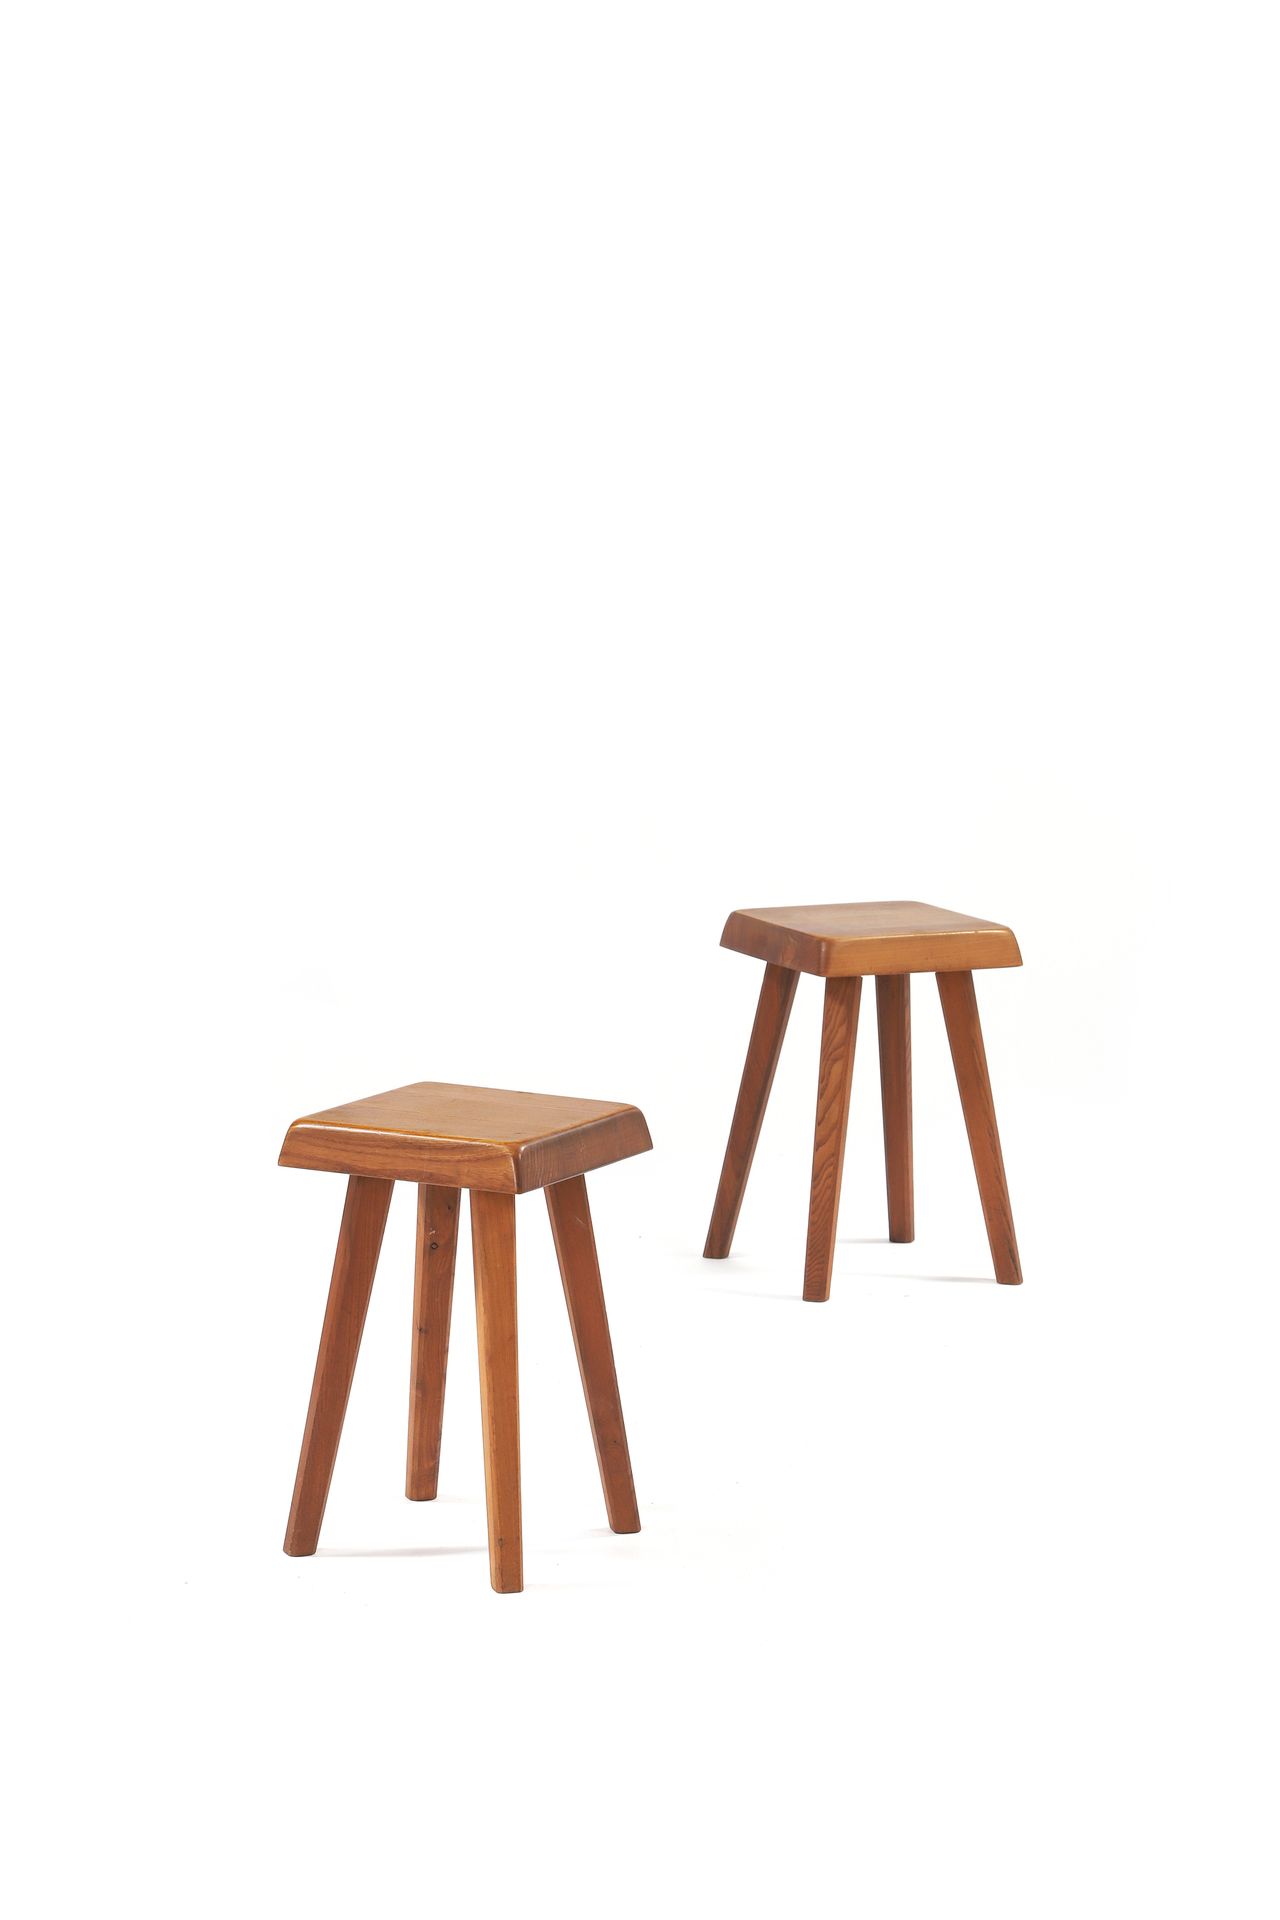 Null Pierre CHAPO (1927-1987) Pair of stools called S01 Orme 45 x 27 x 27 cm. Ci&hellip;